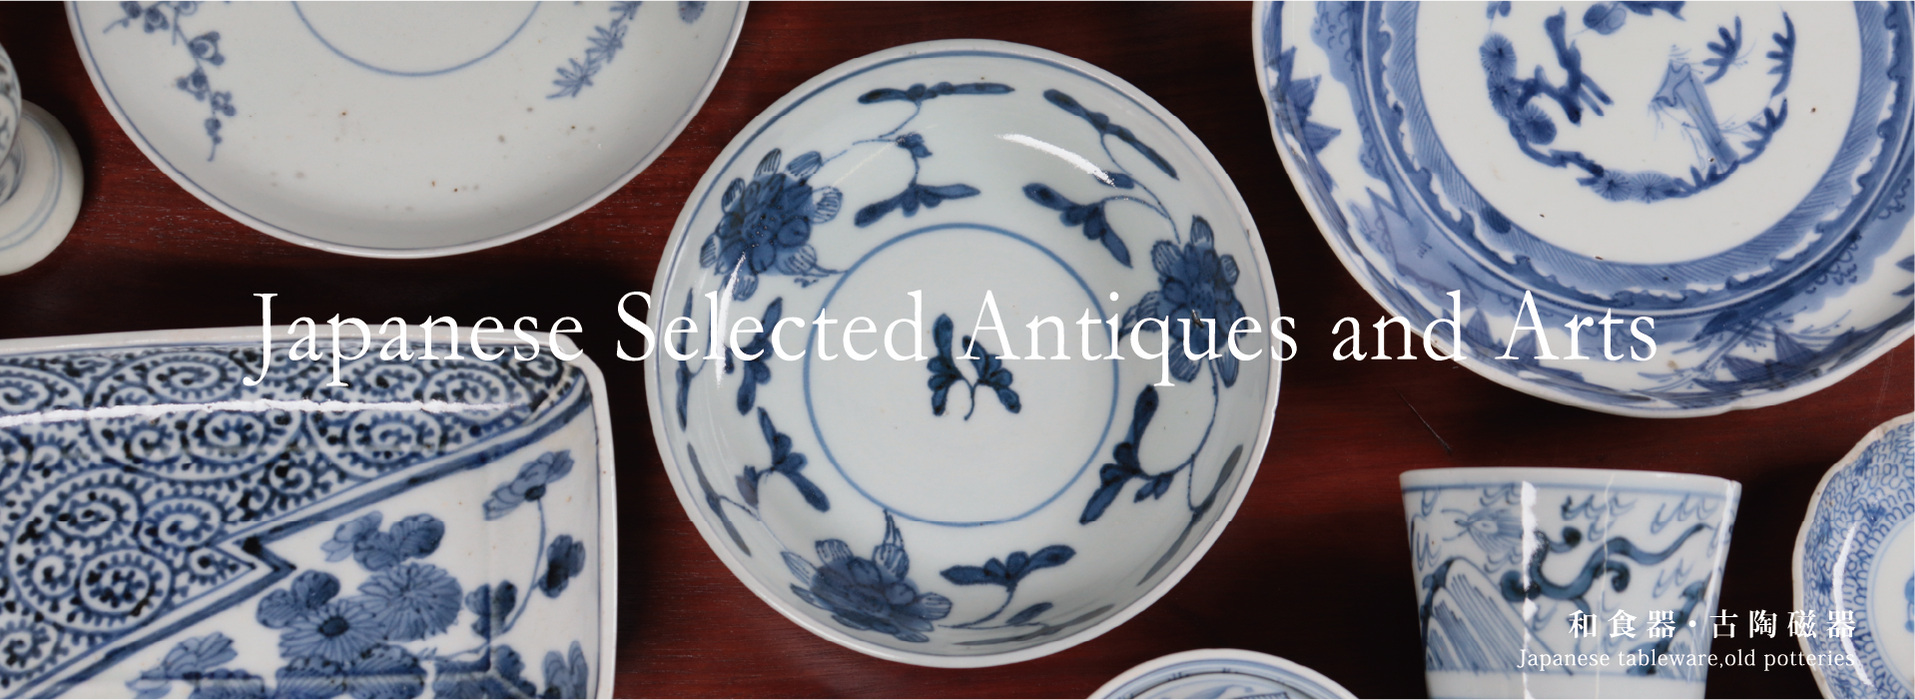 Japanese Selected Antiques and Arts 和食器･古陶磁器 Japanese tableware,old potteries